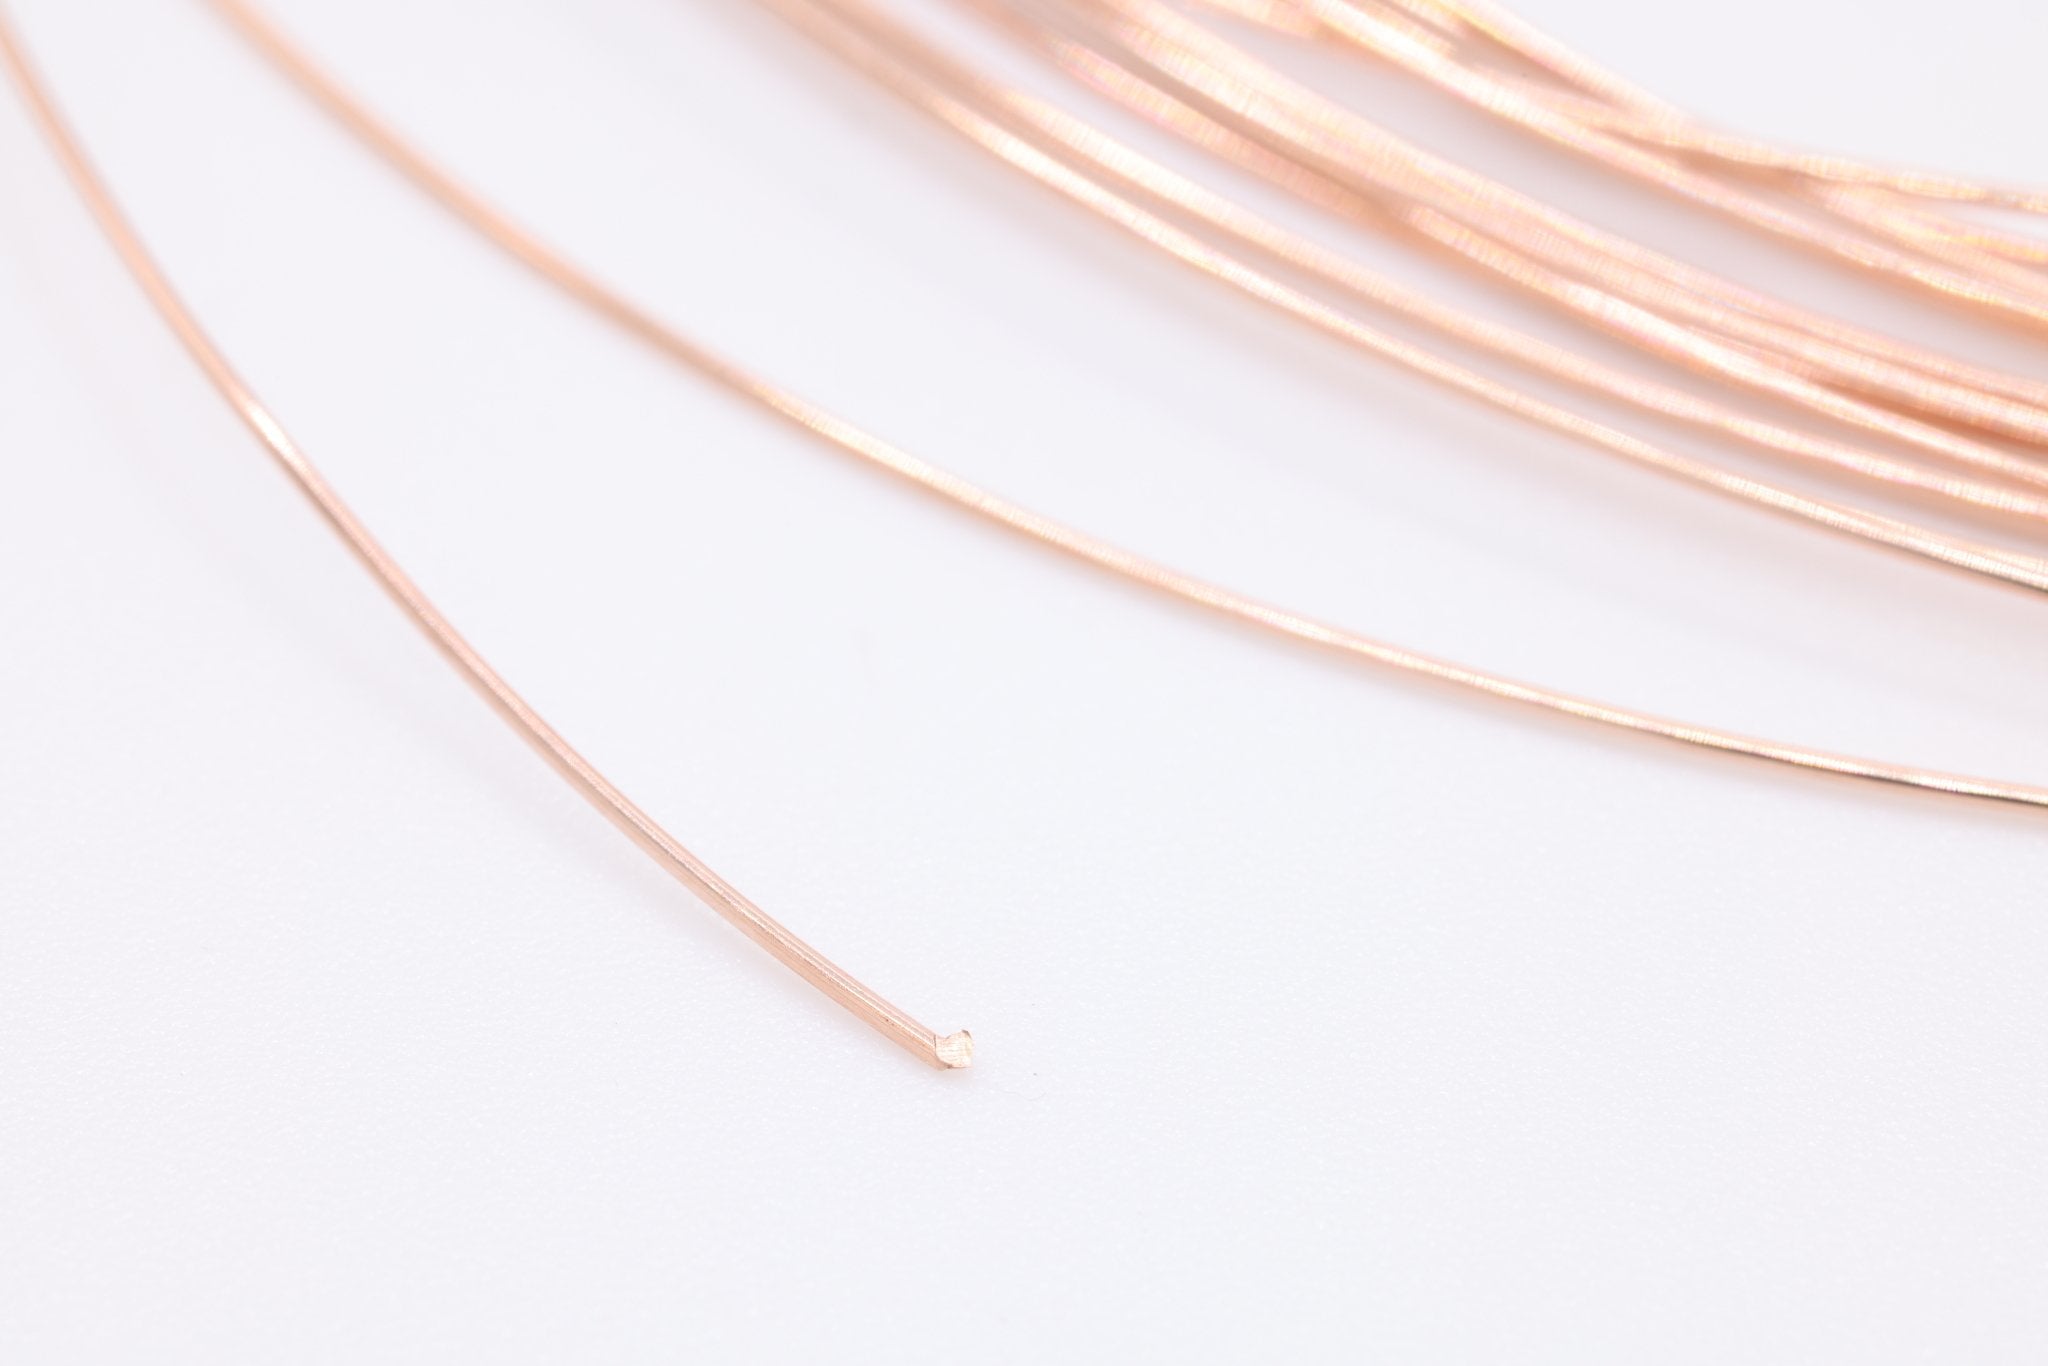 Rose Gold Filled Wire, 18 Gauge 1mm, Rose Gold-Filled, Half Hard Jewelry Wire - HarperCrown